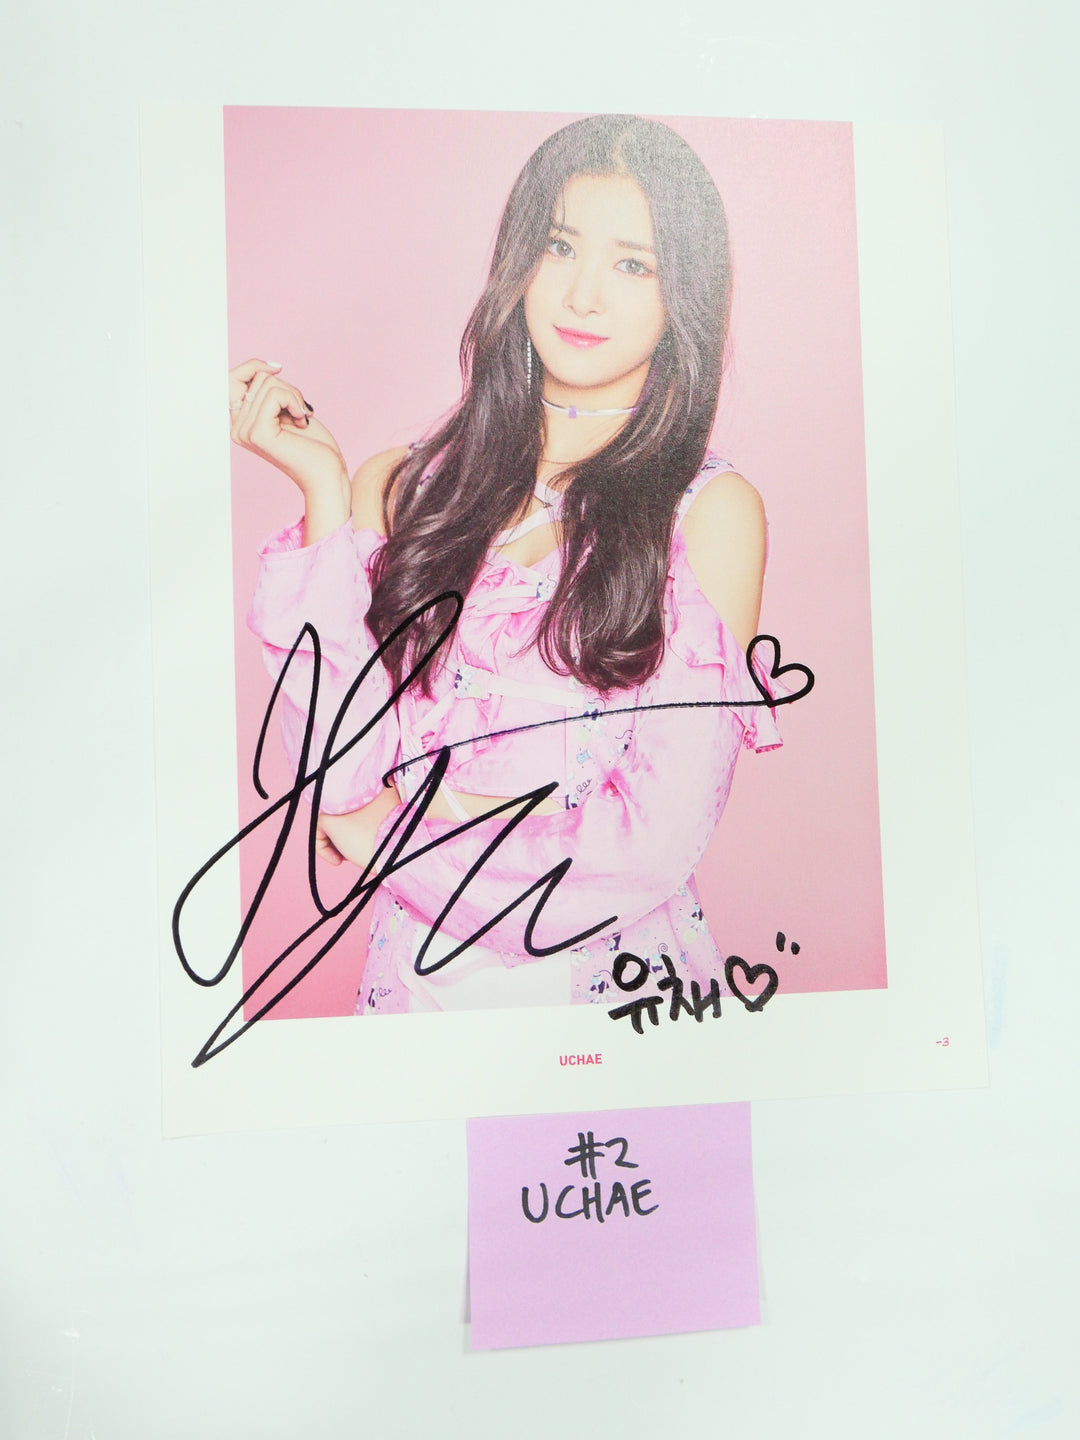 Nature - A Cut Page From Fansign Event Albums (UCHAE, SUNSHINE, GAGA)